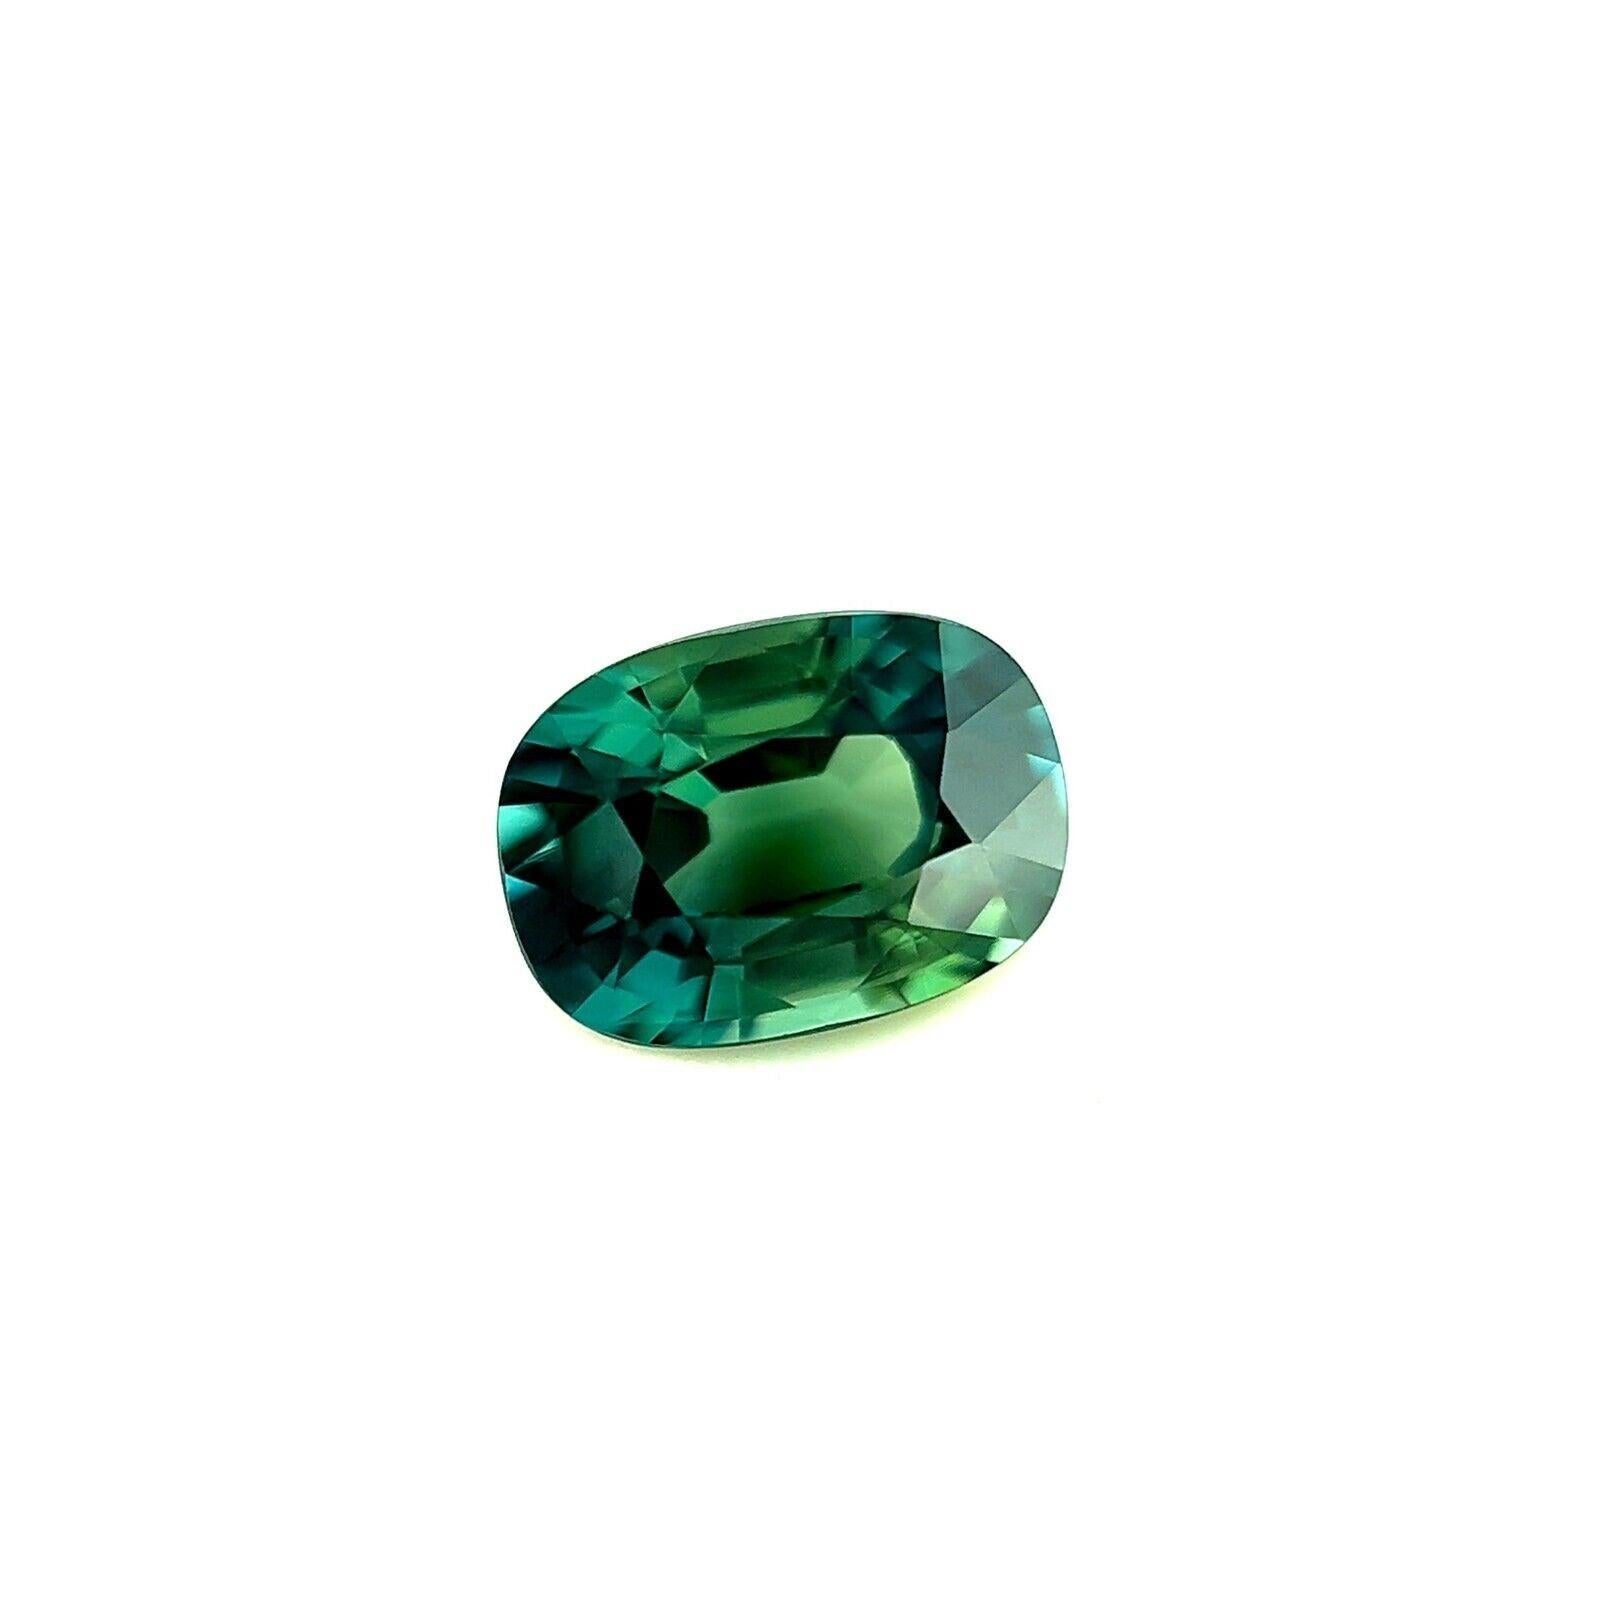 Natural GRA Certified 1.20Ct Green Blue Sapphire Rare Cushion Cut Gem IF

Natural GRA Certified Untreated Green Blue Sapphire Loose Gemstone.
1.20 Carat sapphire with a beautiful deep greenish blue colour.
Fully certified by GRA confirming stone as